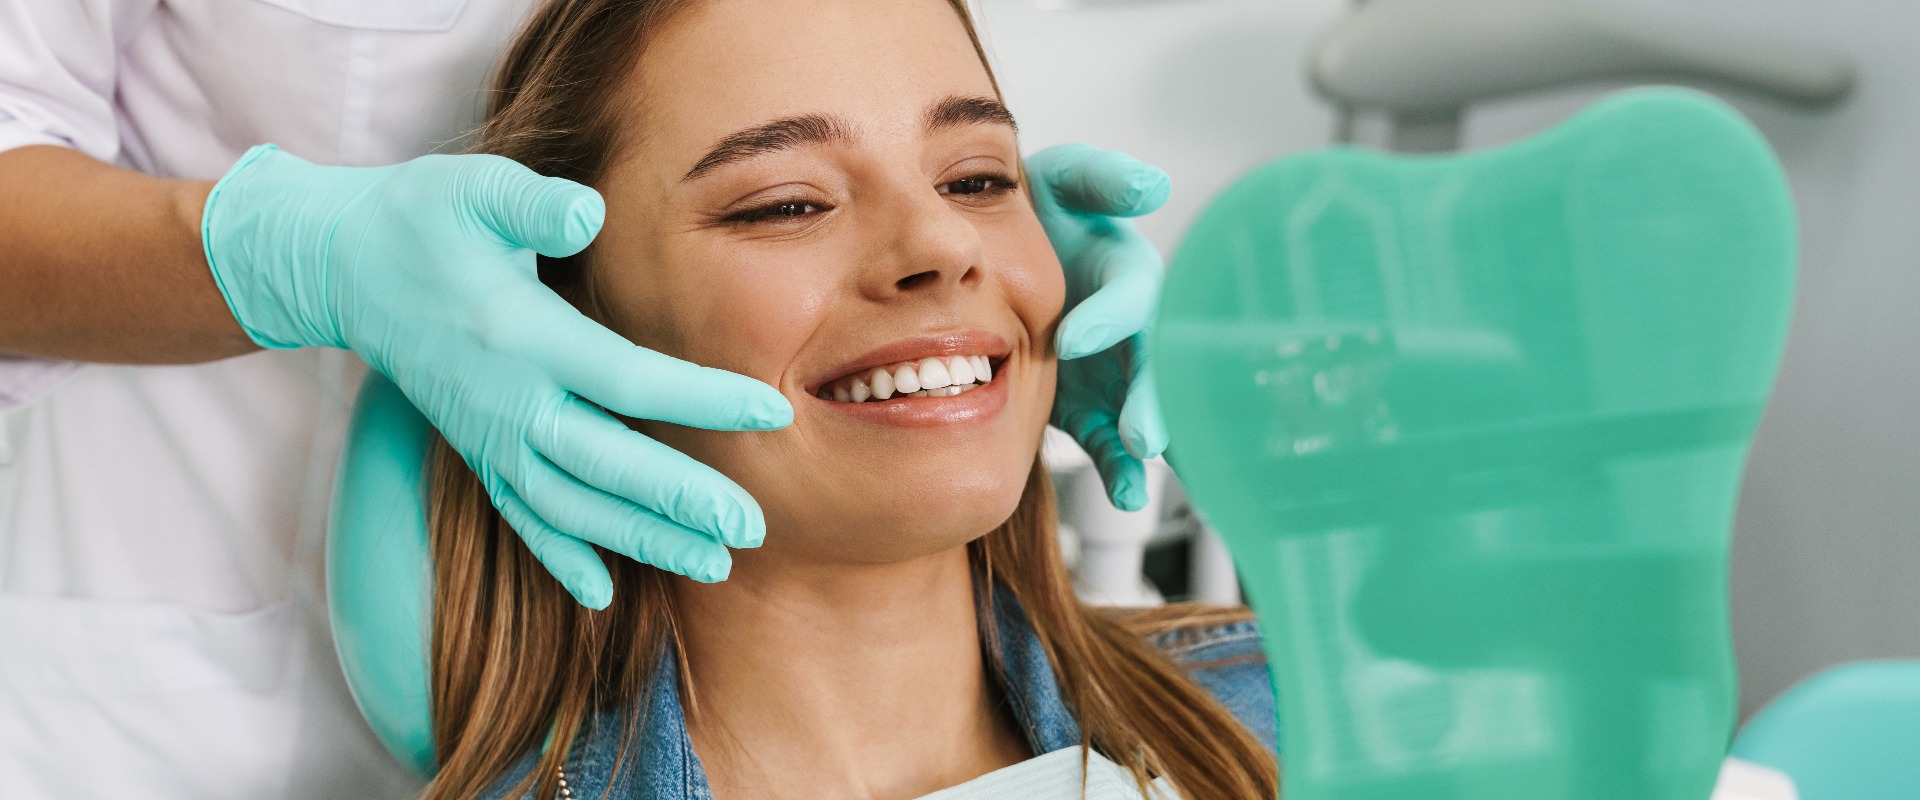 European young woman smiling while looking at mirror in dental clinic jpg